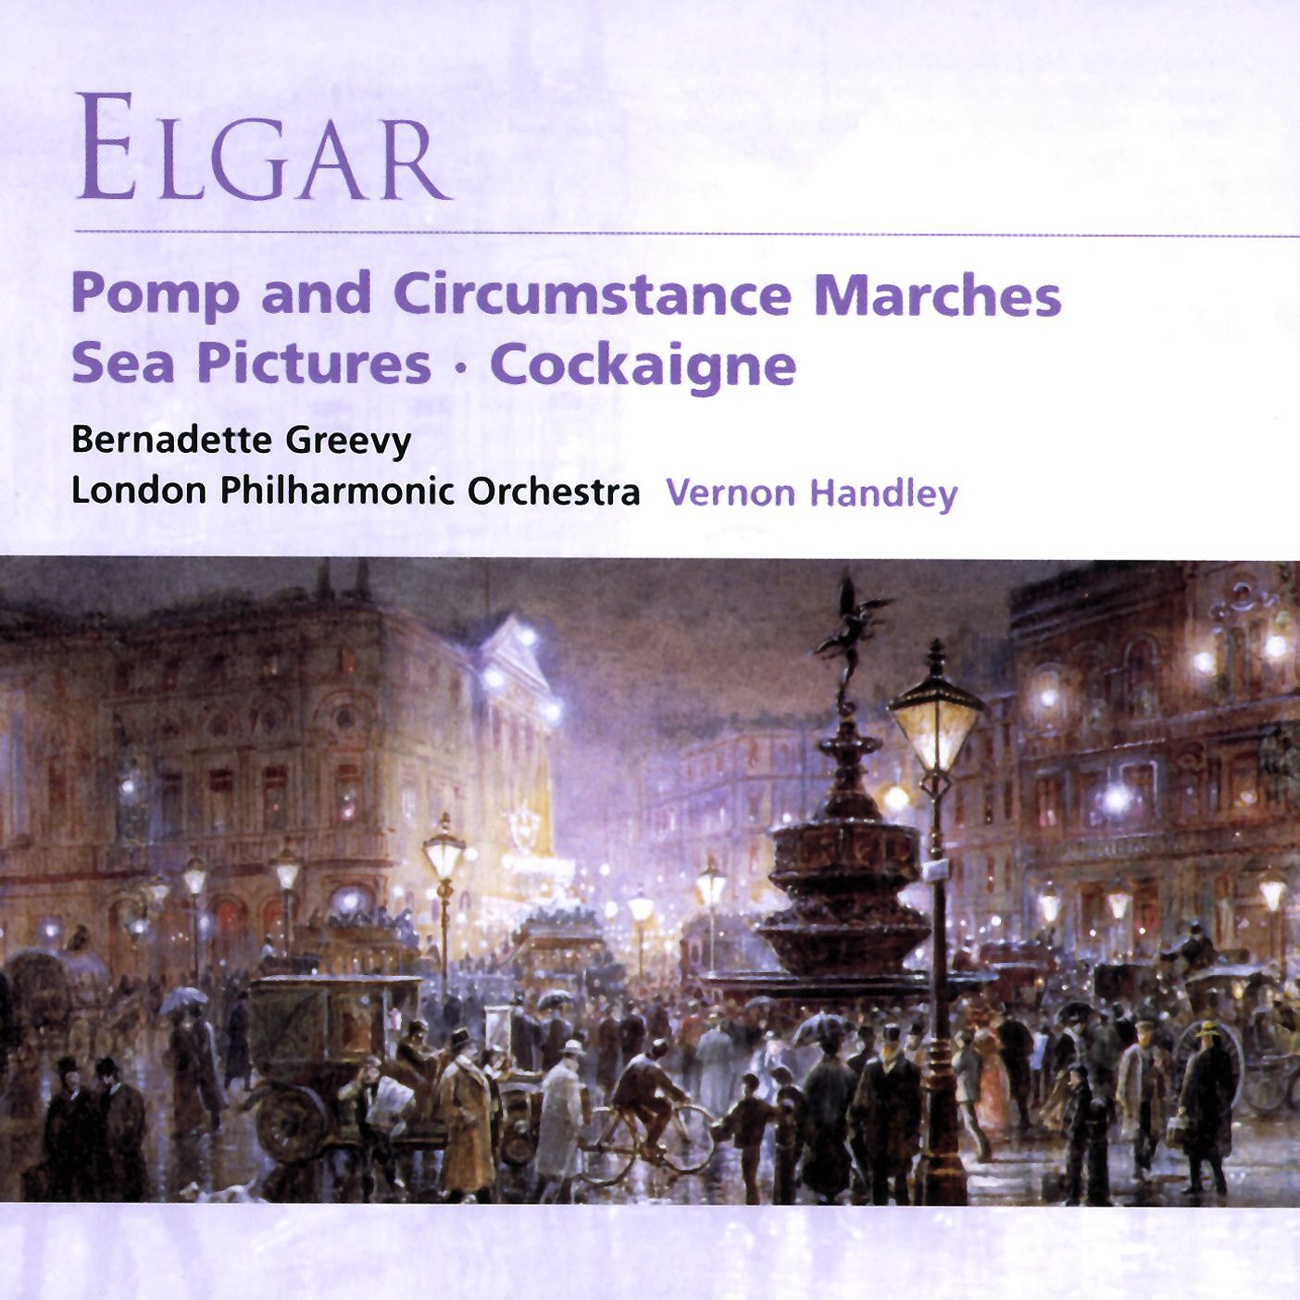 Pomp and Circumstance - Military Marches Op. 39: No. 5 in C